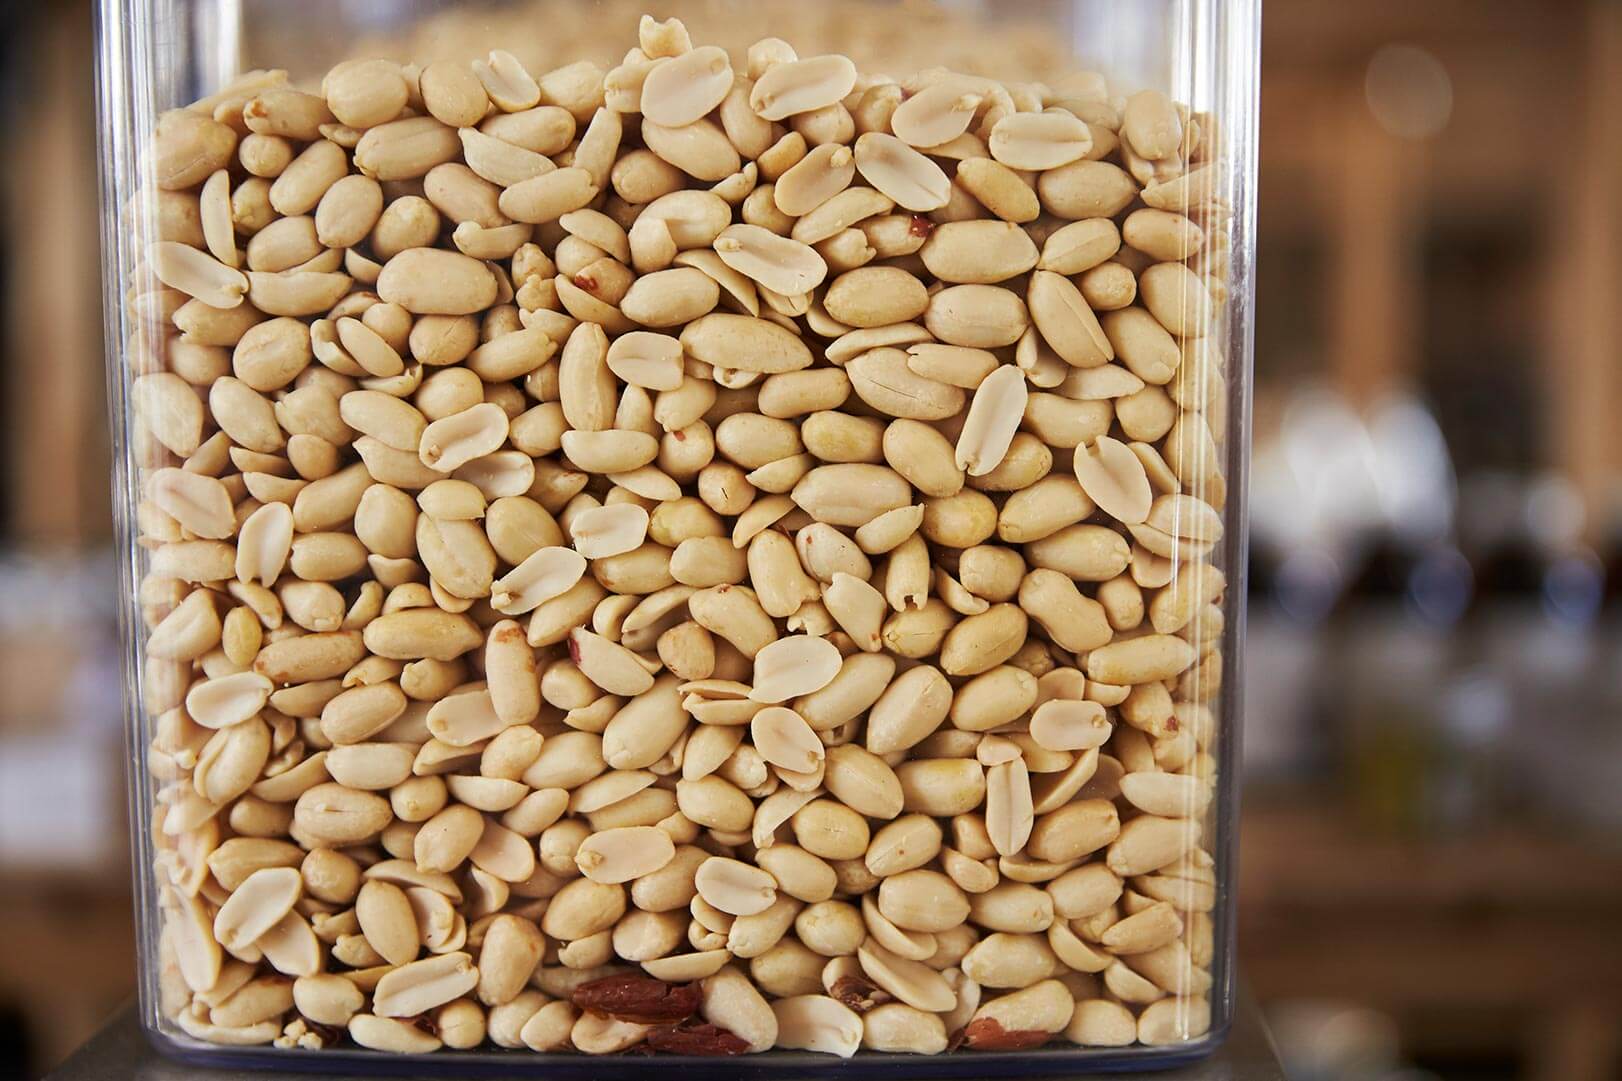 How To Store Peanuts Long-Term